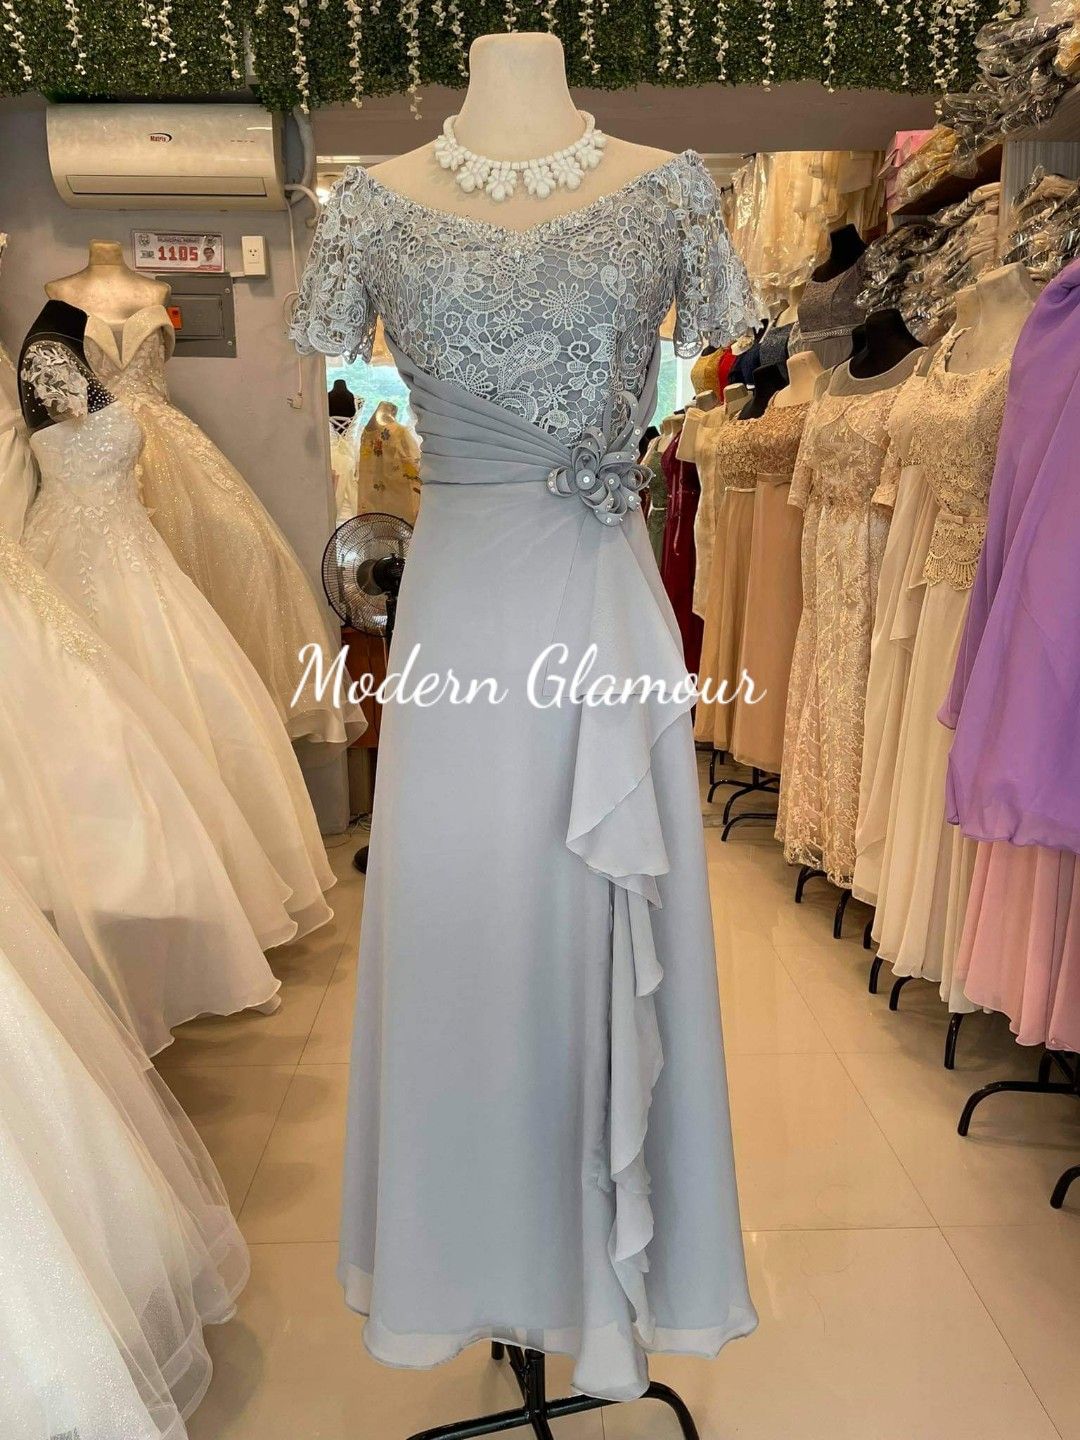 Bride Groom, Formal Event Gown ...